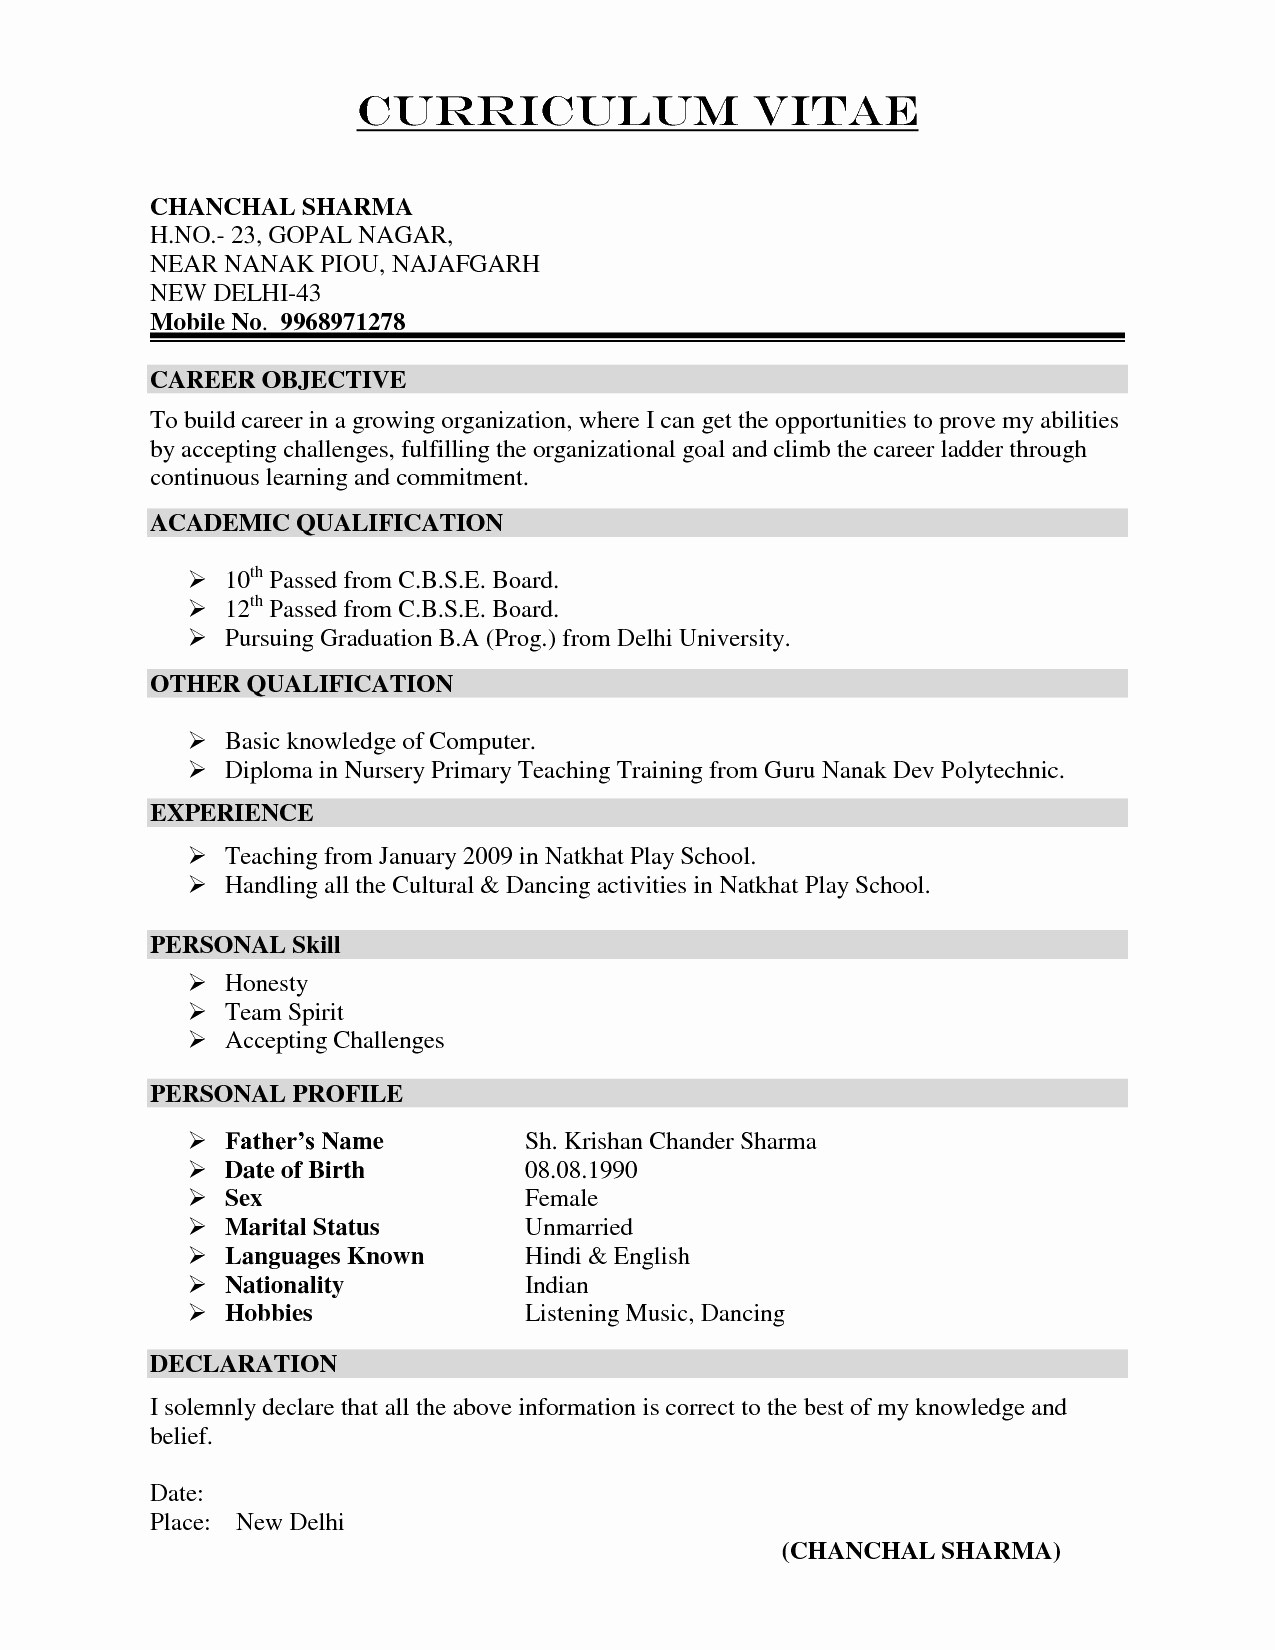 Free Cover Letter Design Template - Free Resume Cover Letter format S